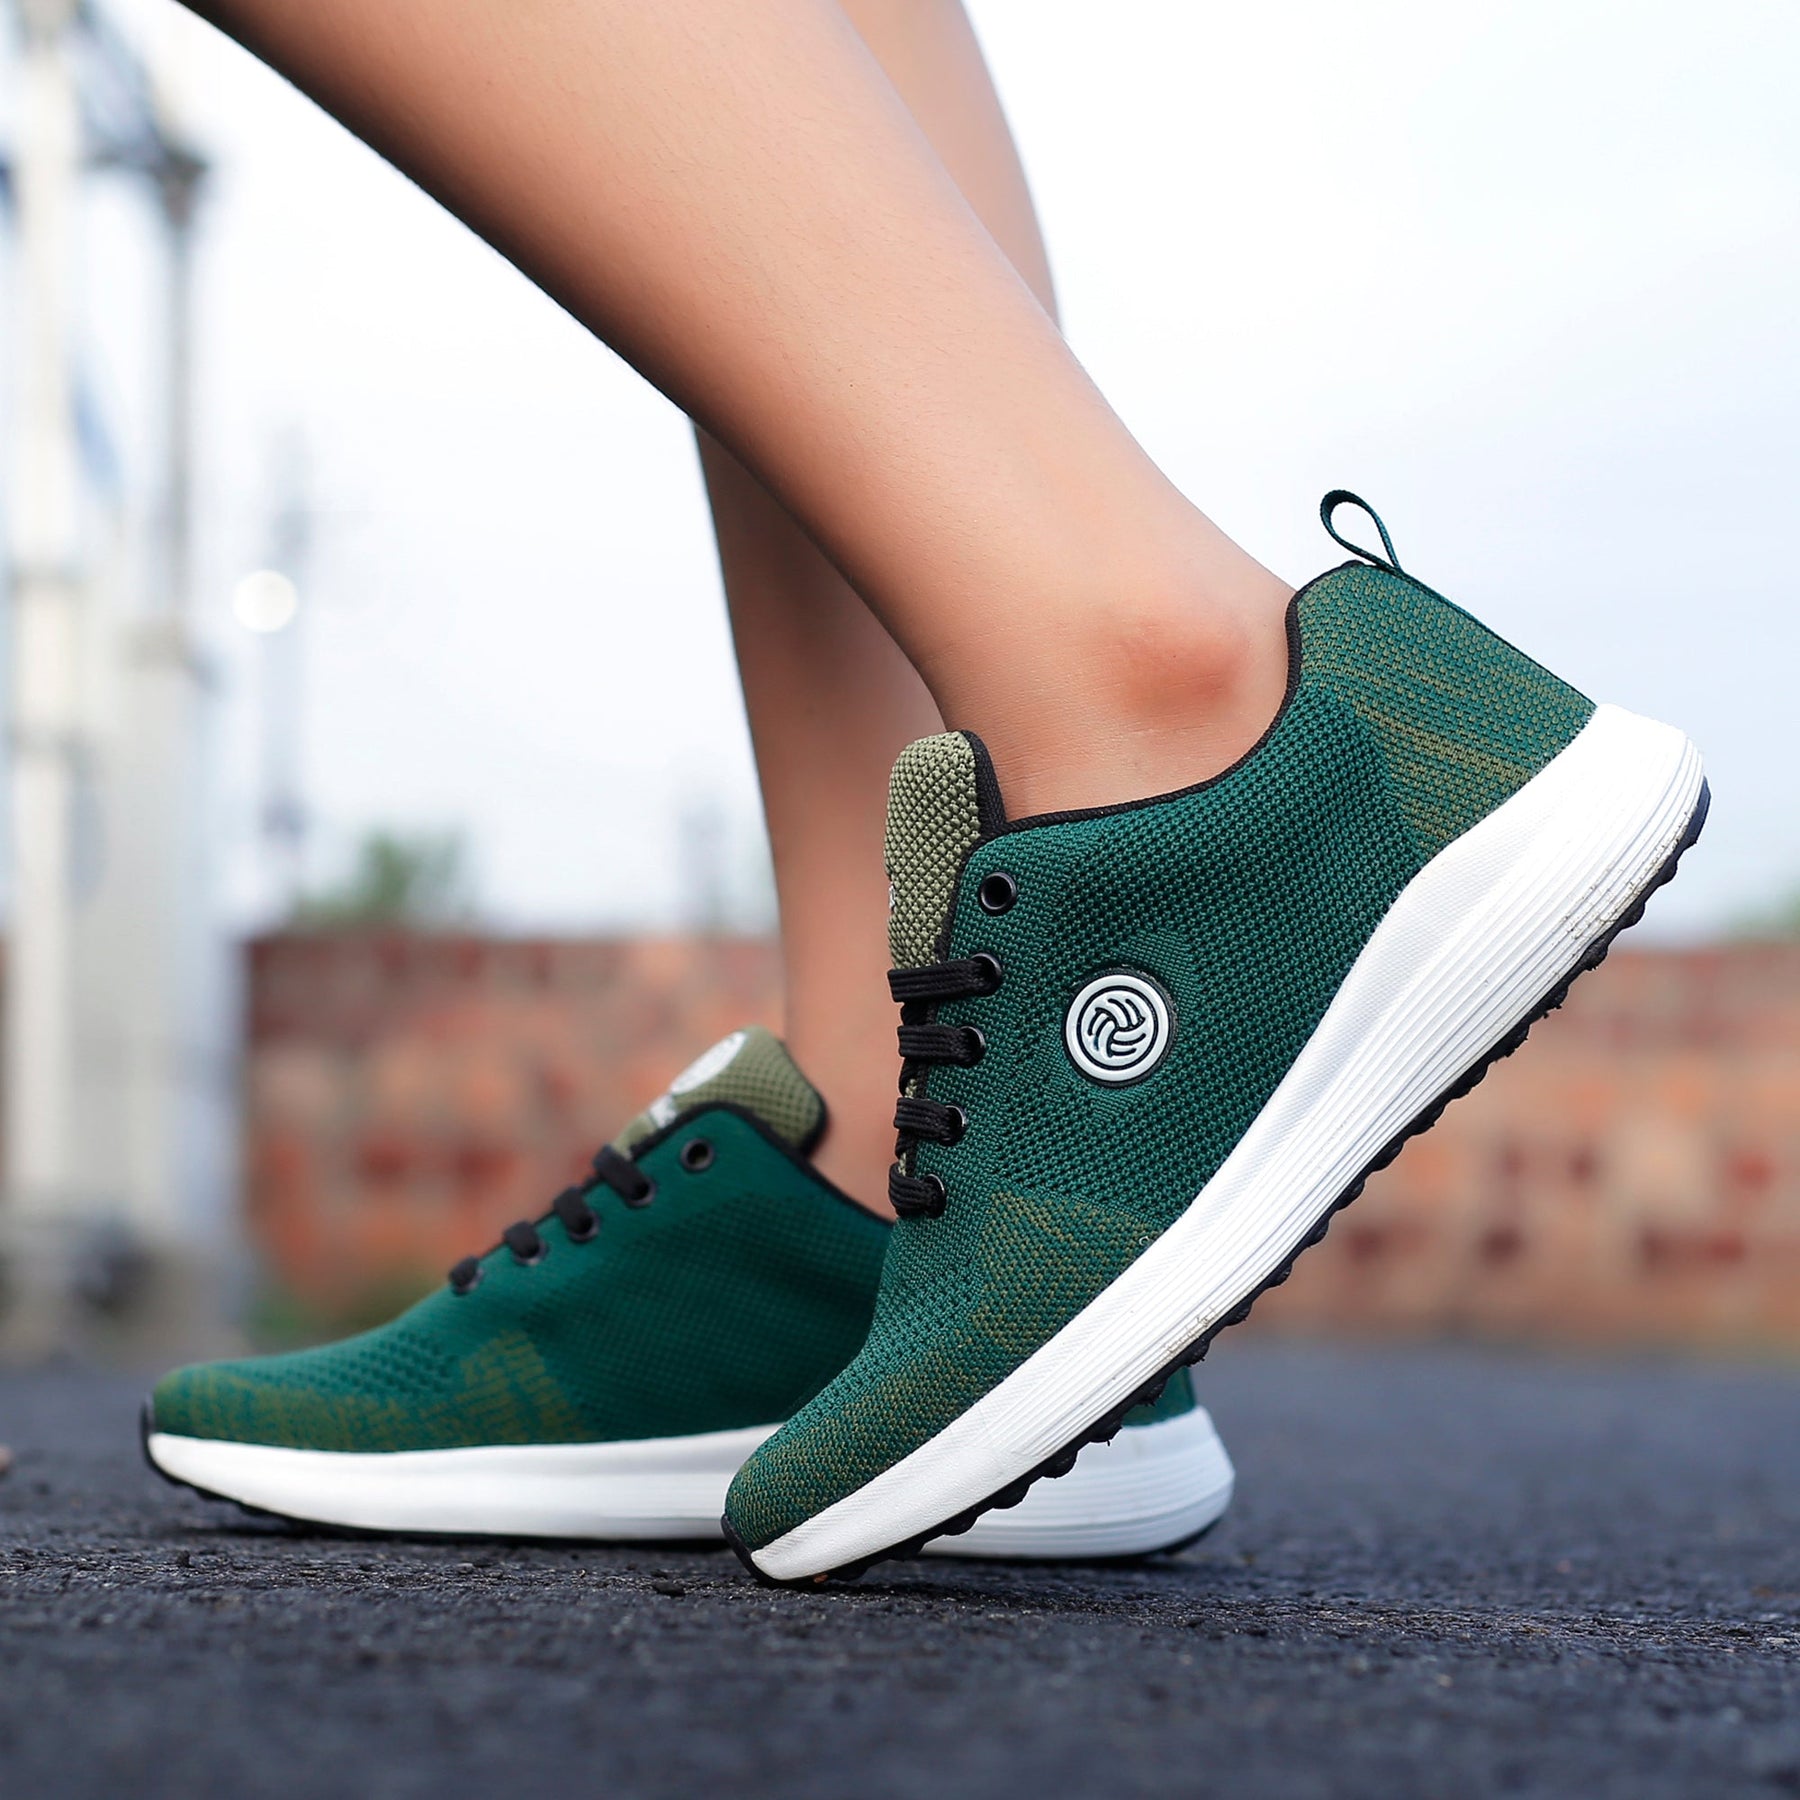 sneakers shoes for women, sneakers for women, casual shoes for women, green shoes for women